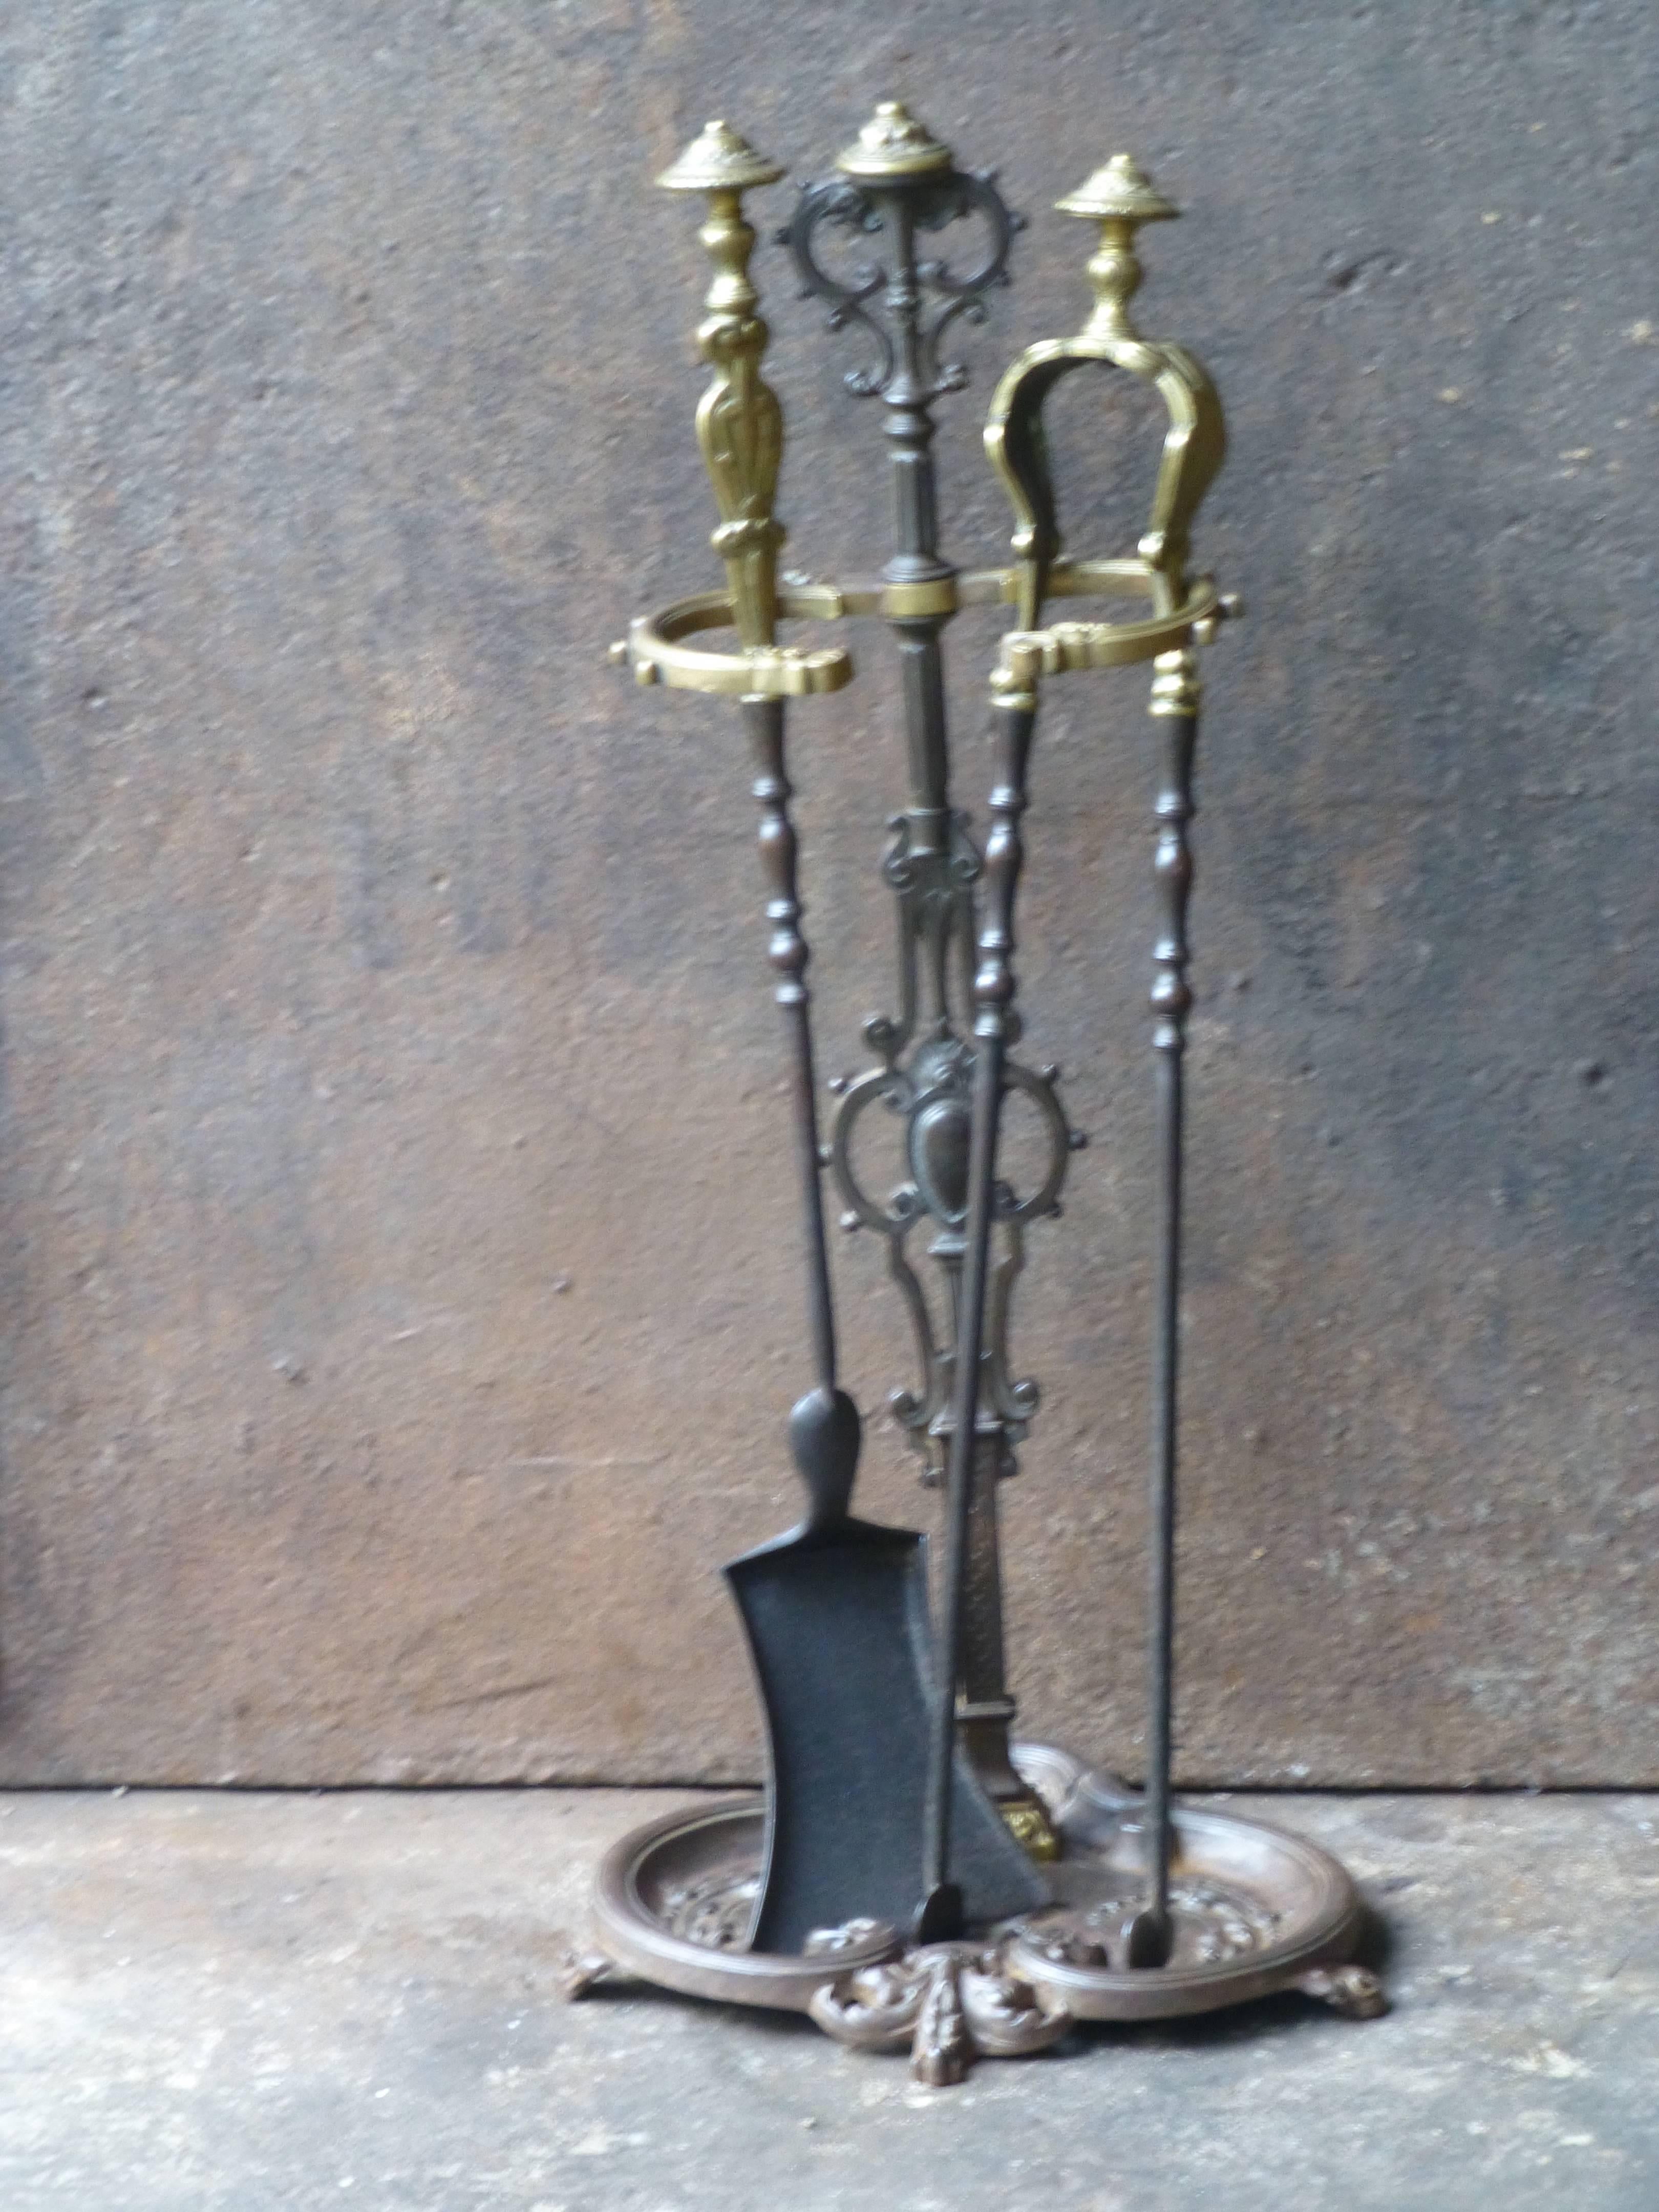 19th century French fireplace tool set made of wrought iron (tools) and cast iron and brass (stand).